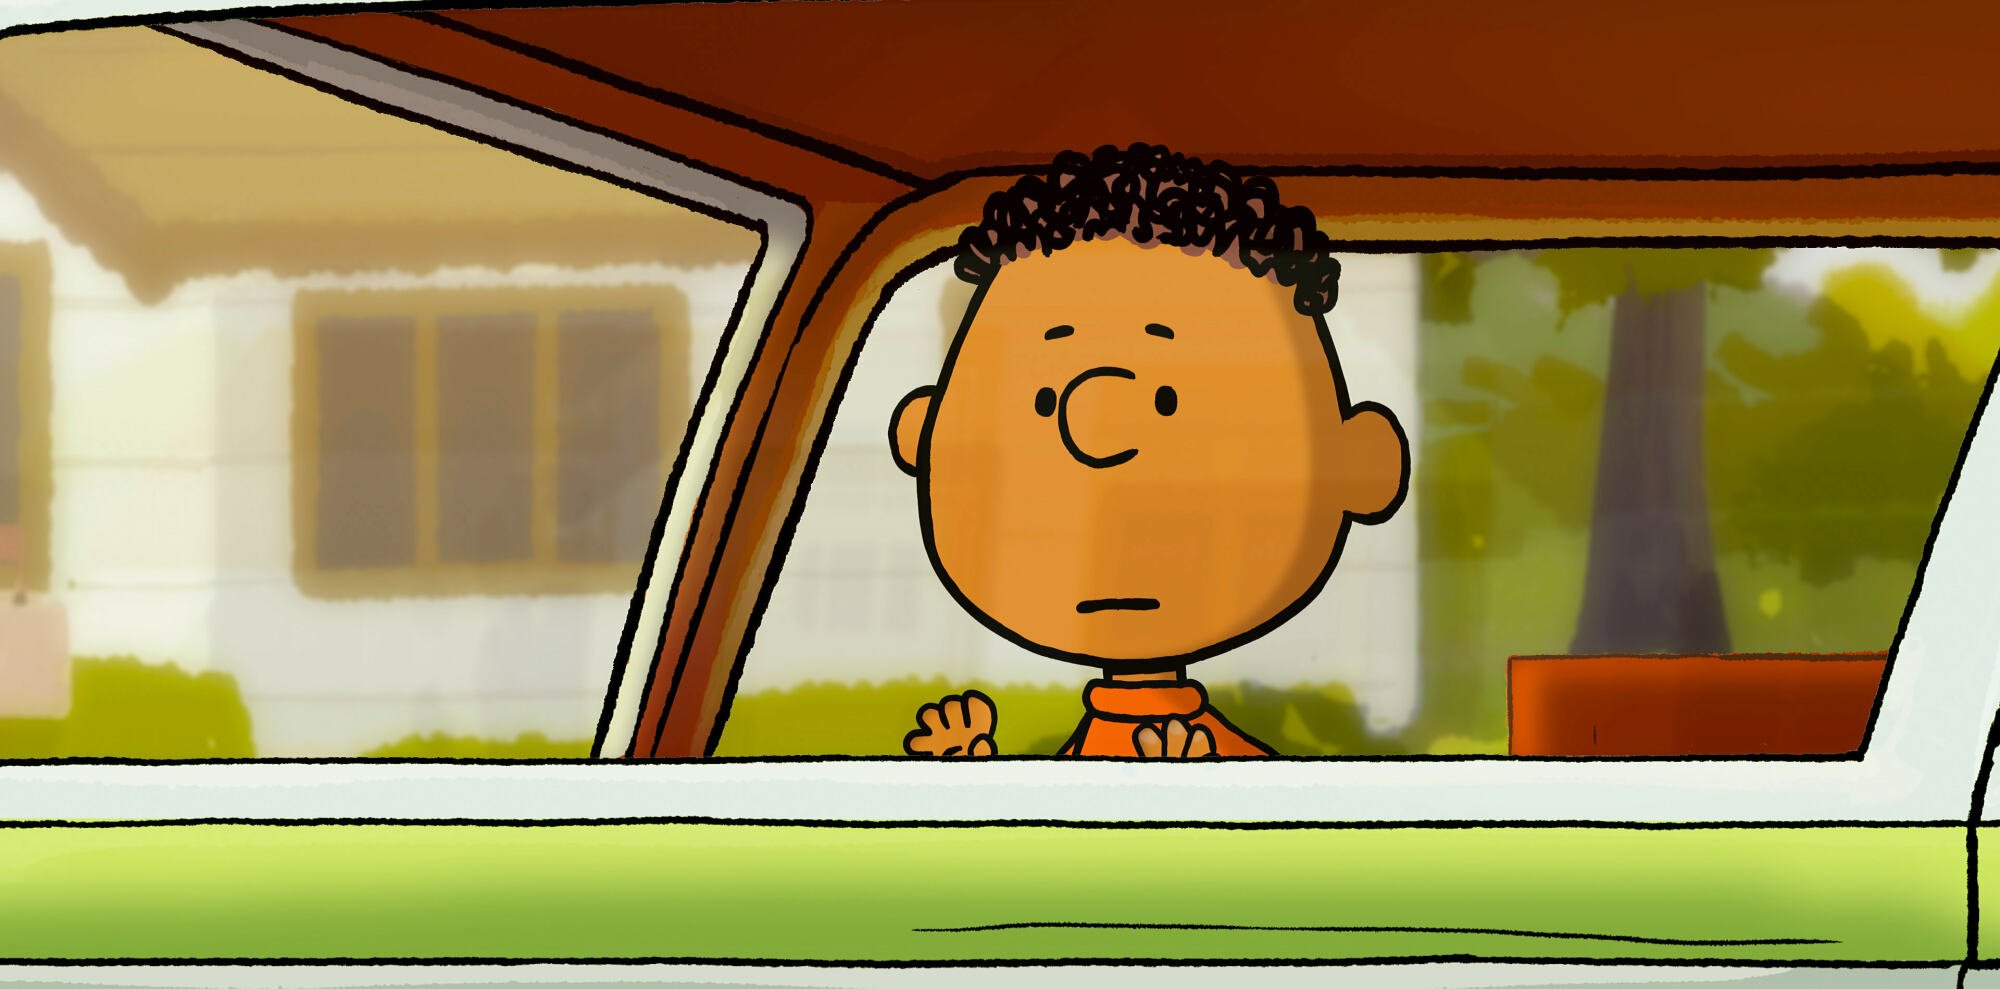 Franklin stares out the window of a green car.